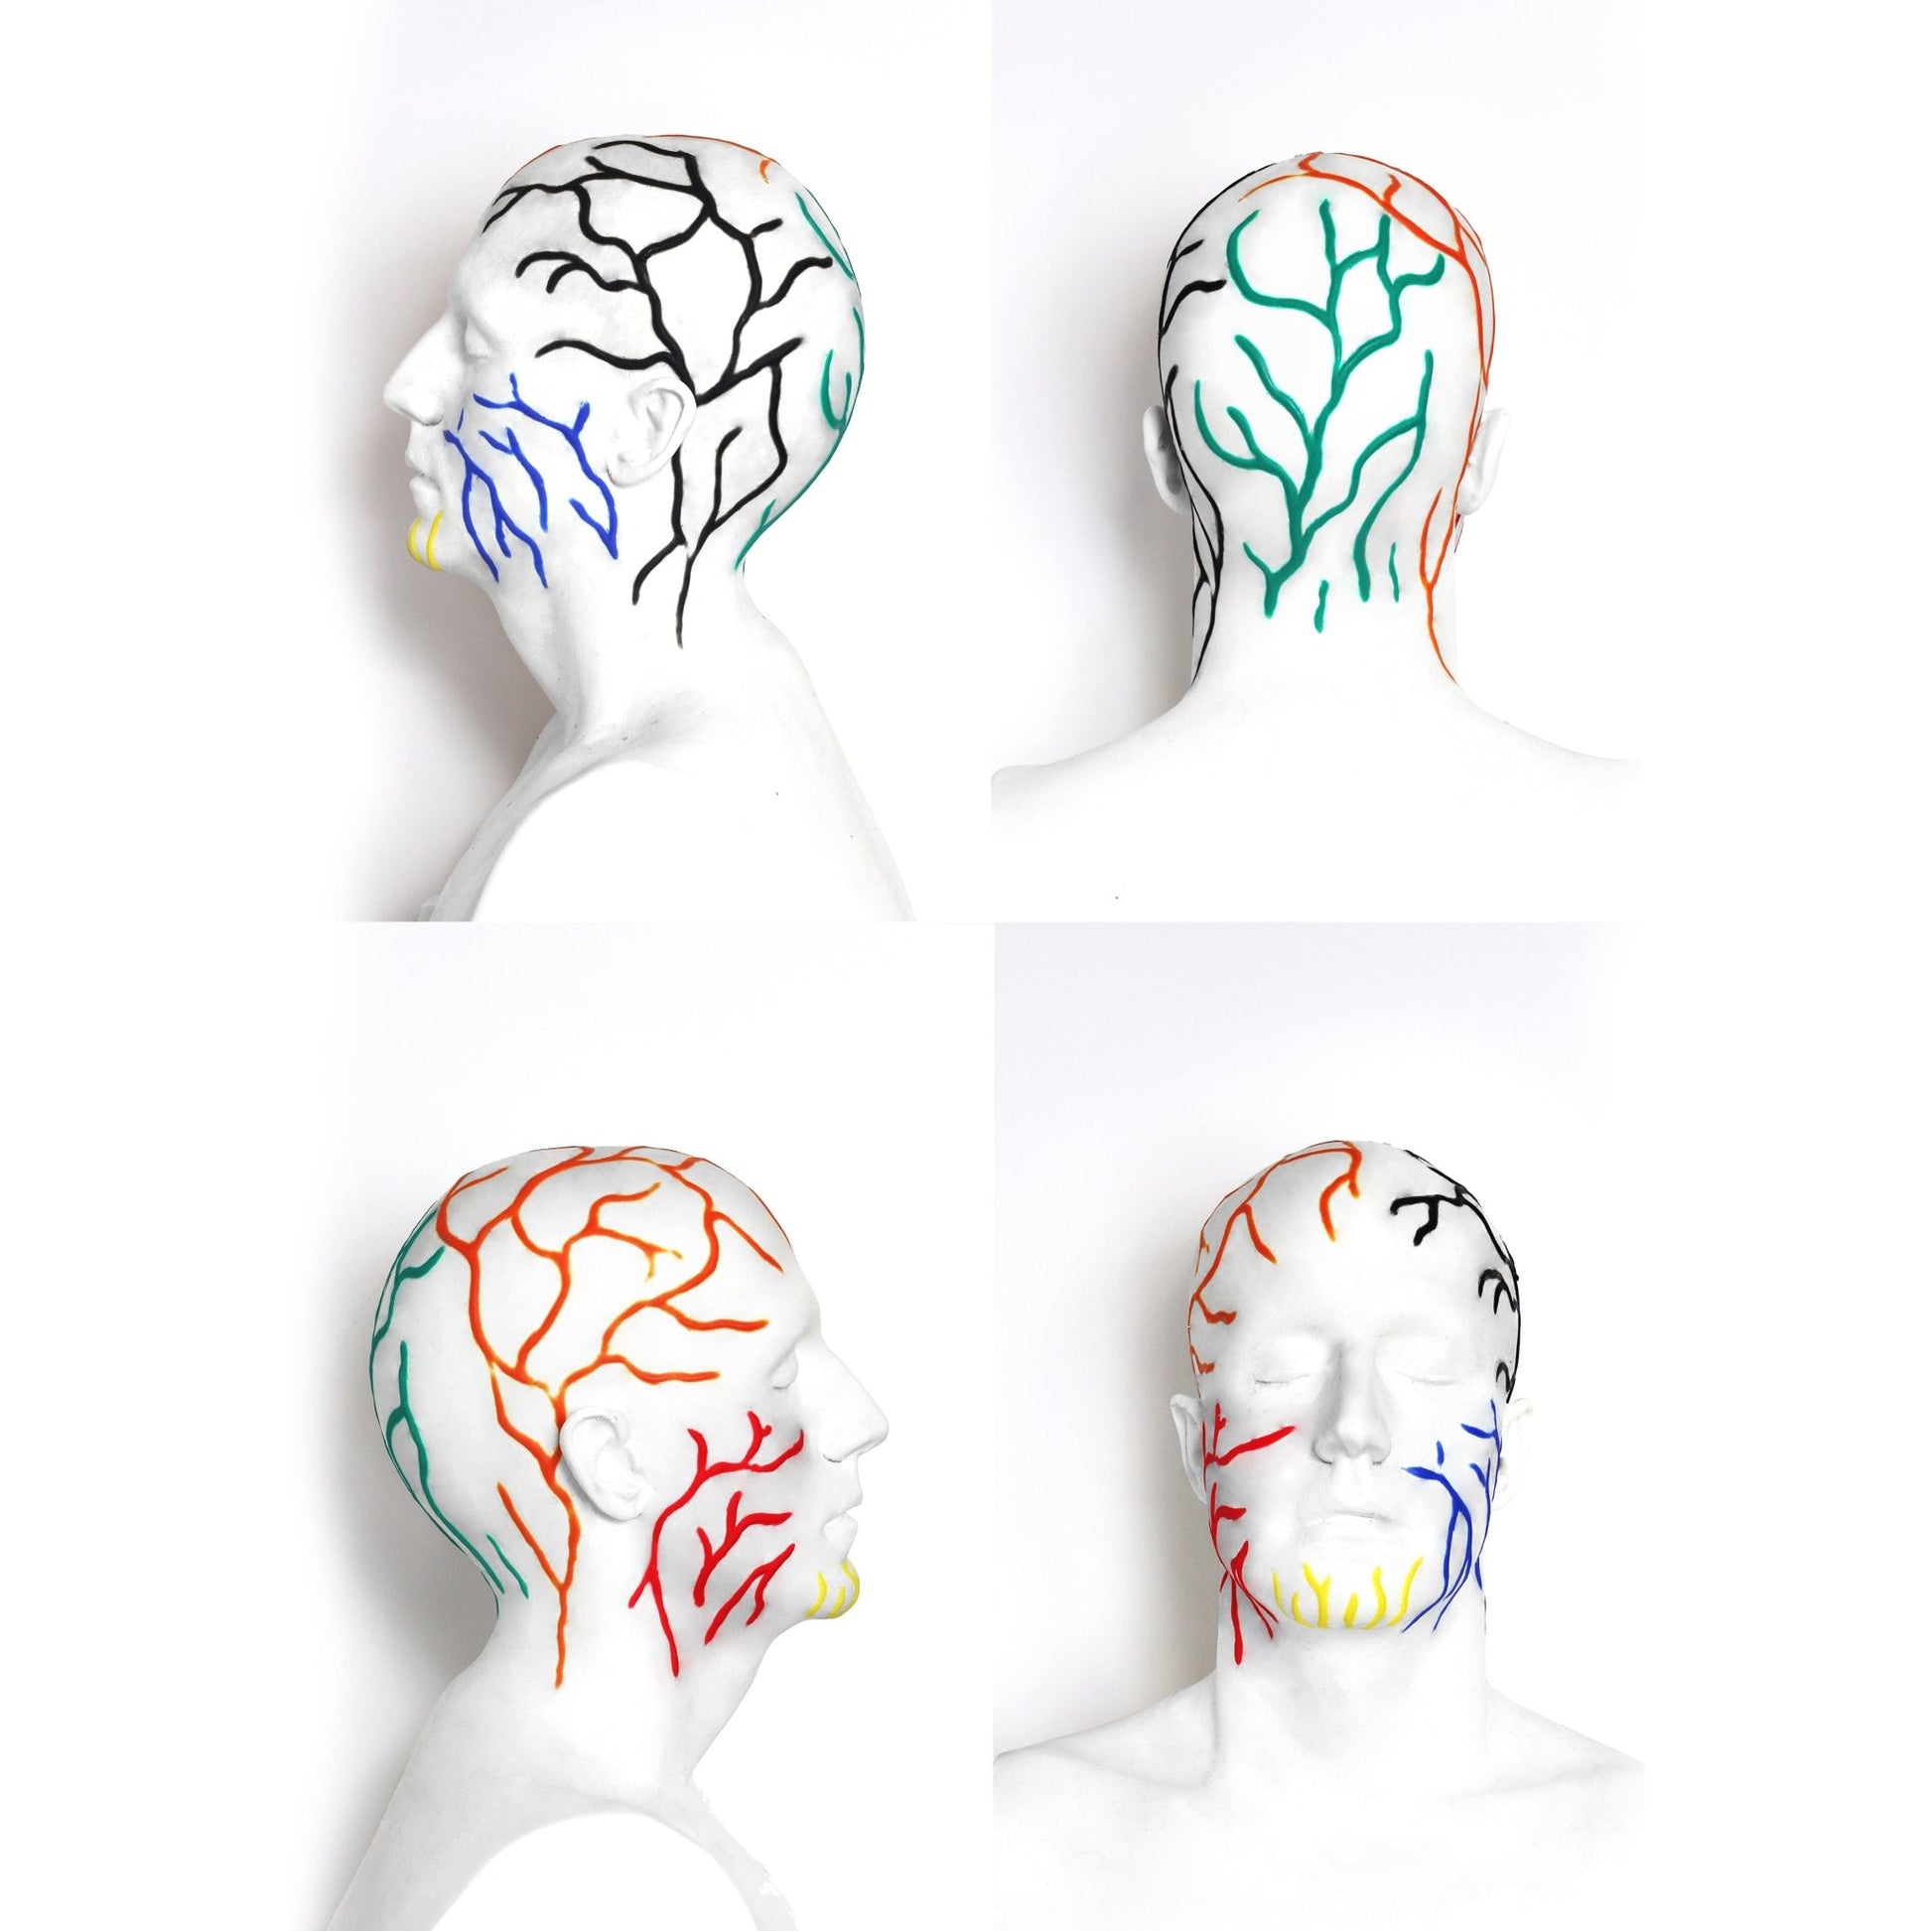 Mannequin head wearing veins prosthetic in different colours